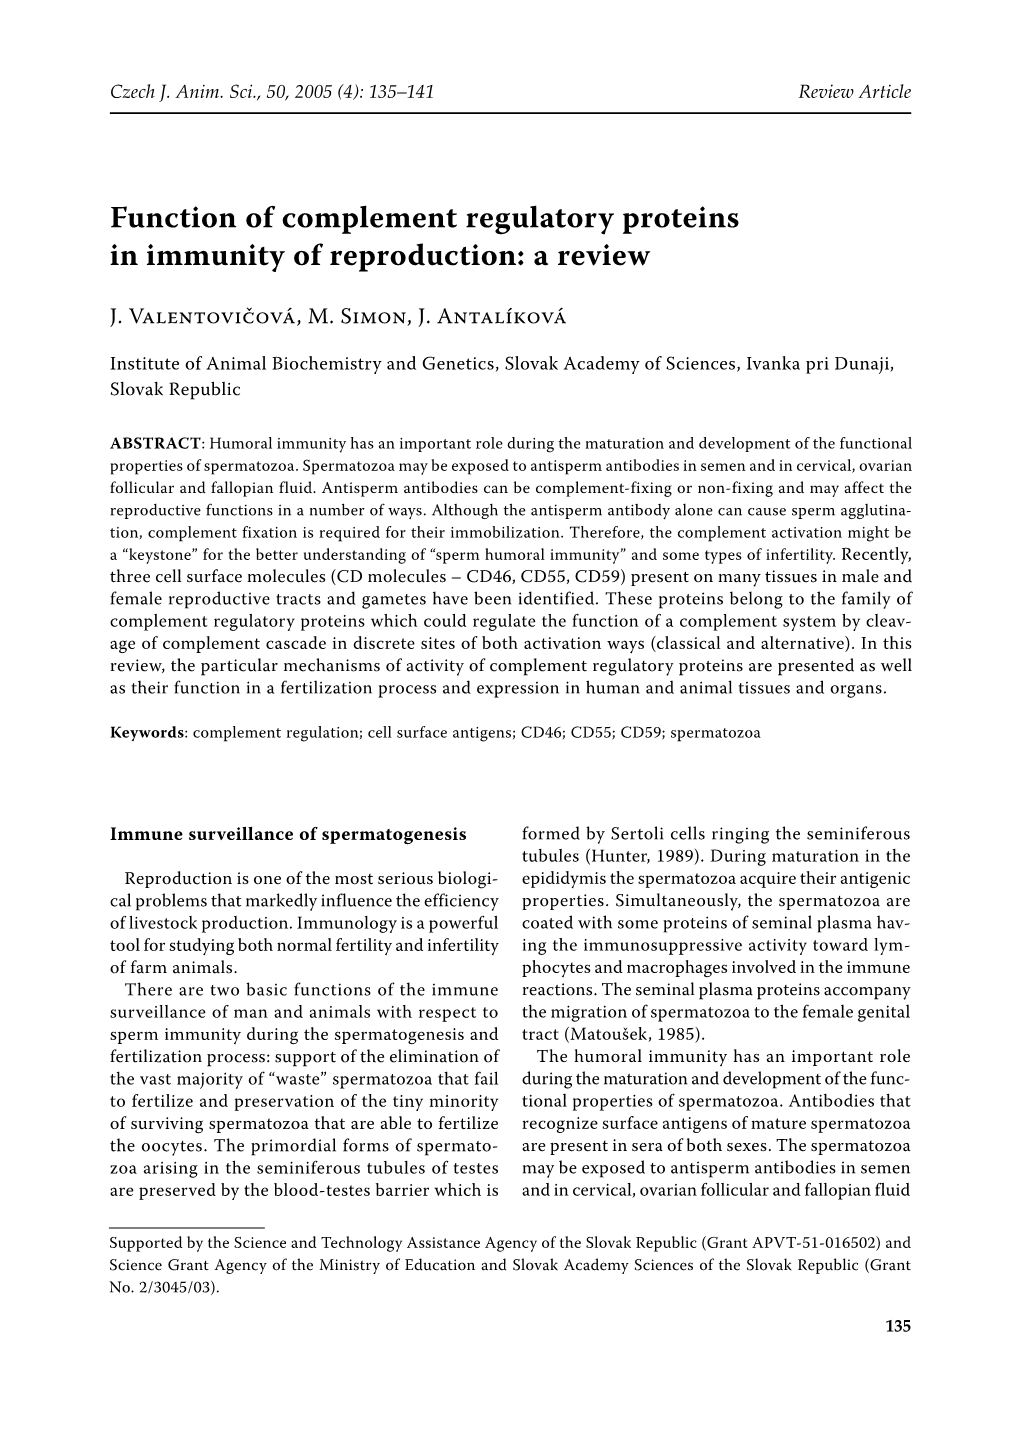 Function of Complement Regulatory Proteins in Immunity of Reproduction: a Review